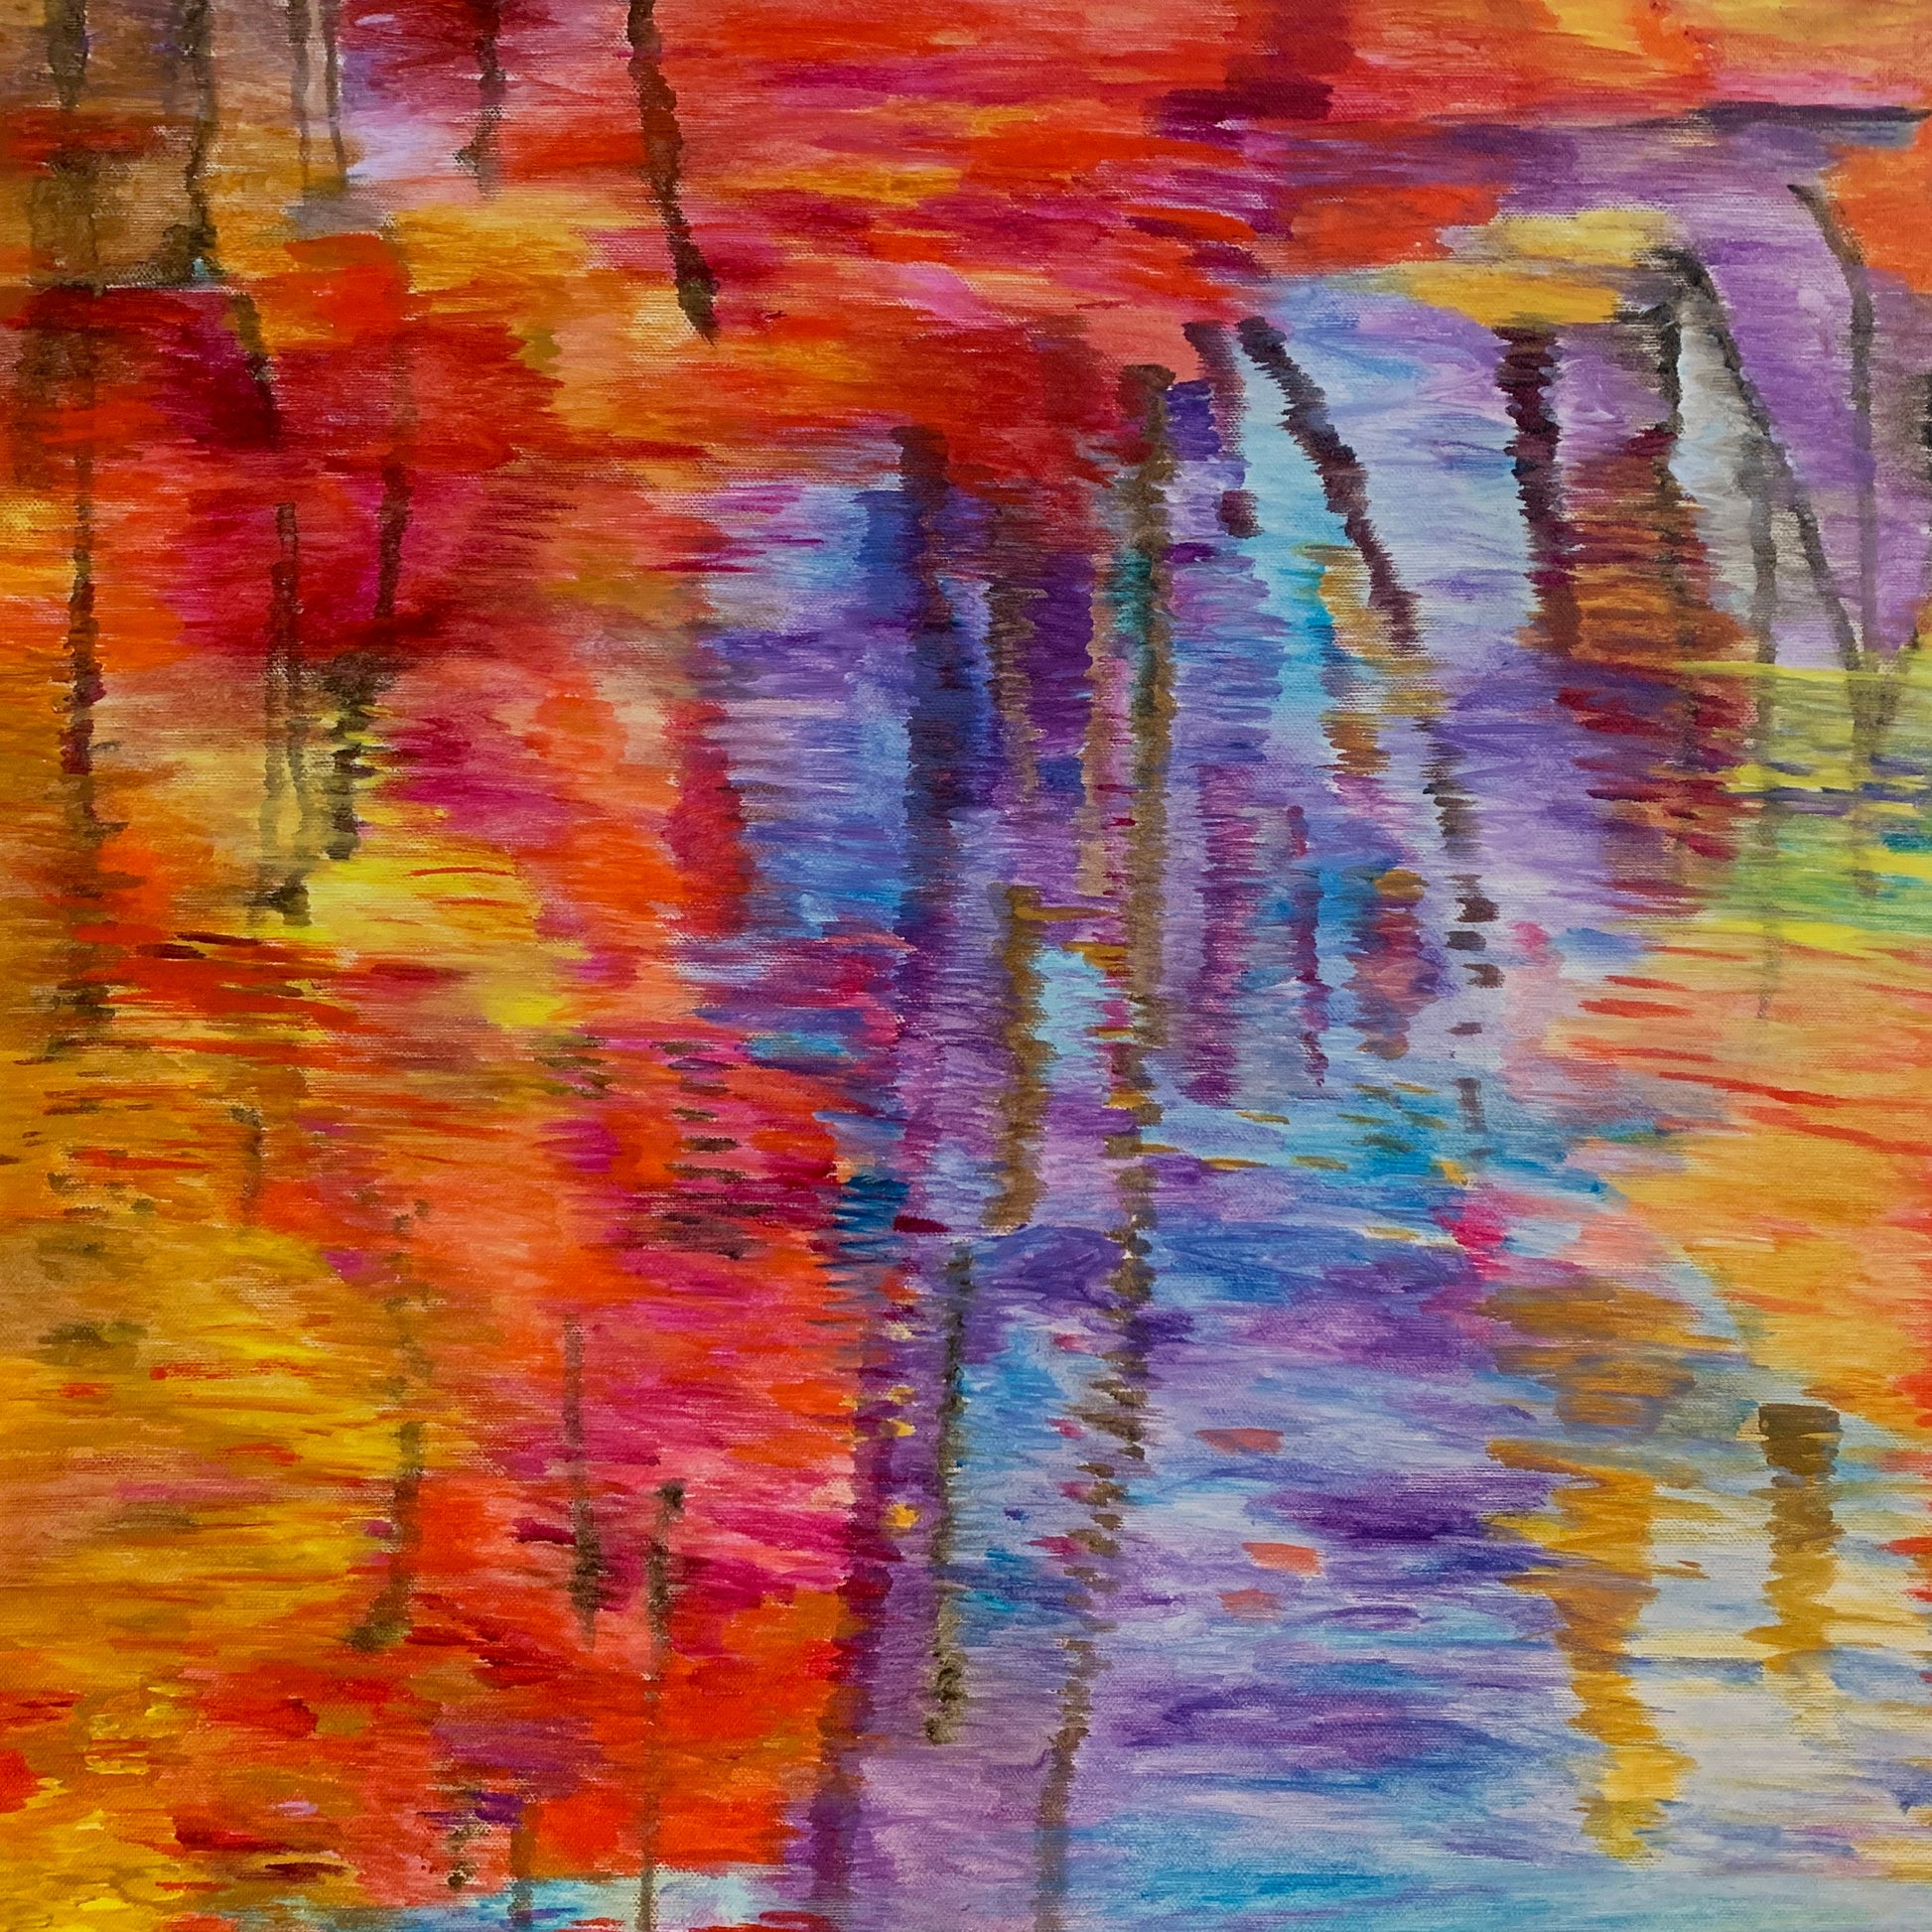 Abstract water reflection acrylic painting in tones of oranges and lavender blues.